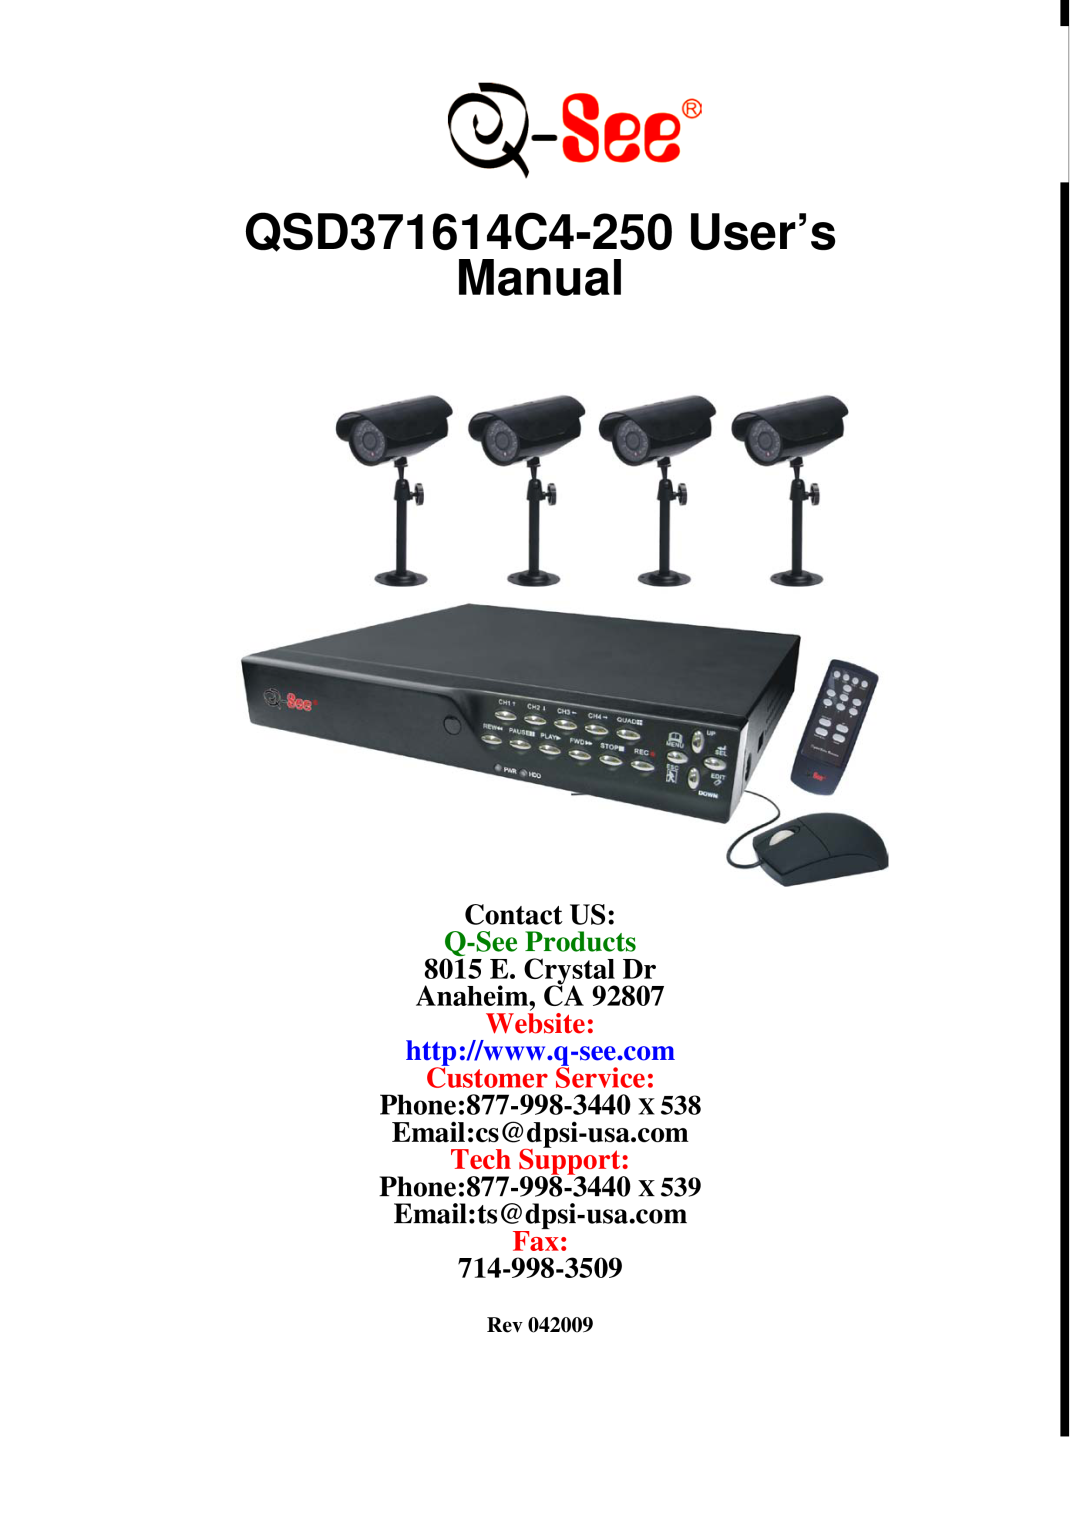 Q-See QSD371614C4-250 user manual Contact US, Q-SeeProducts, 8015 E. Crystal Dr Anaheim, CA, Website, Customer Service 